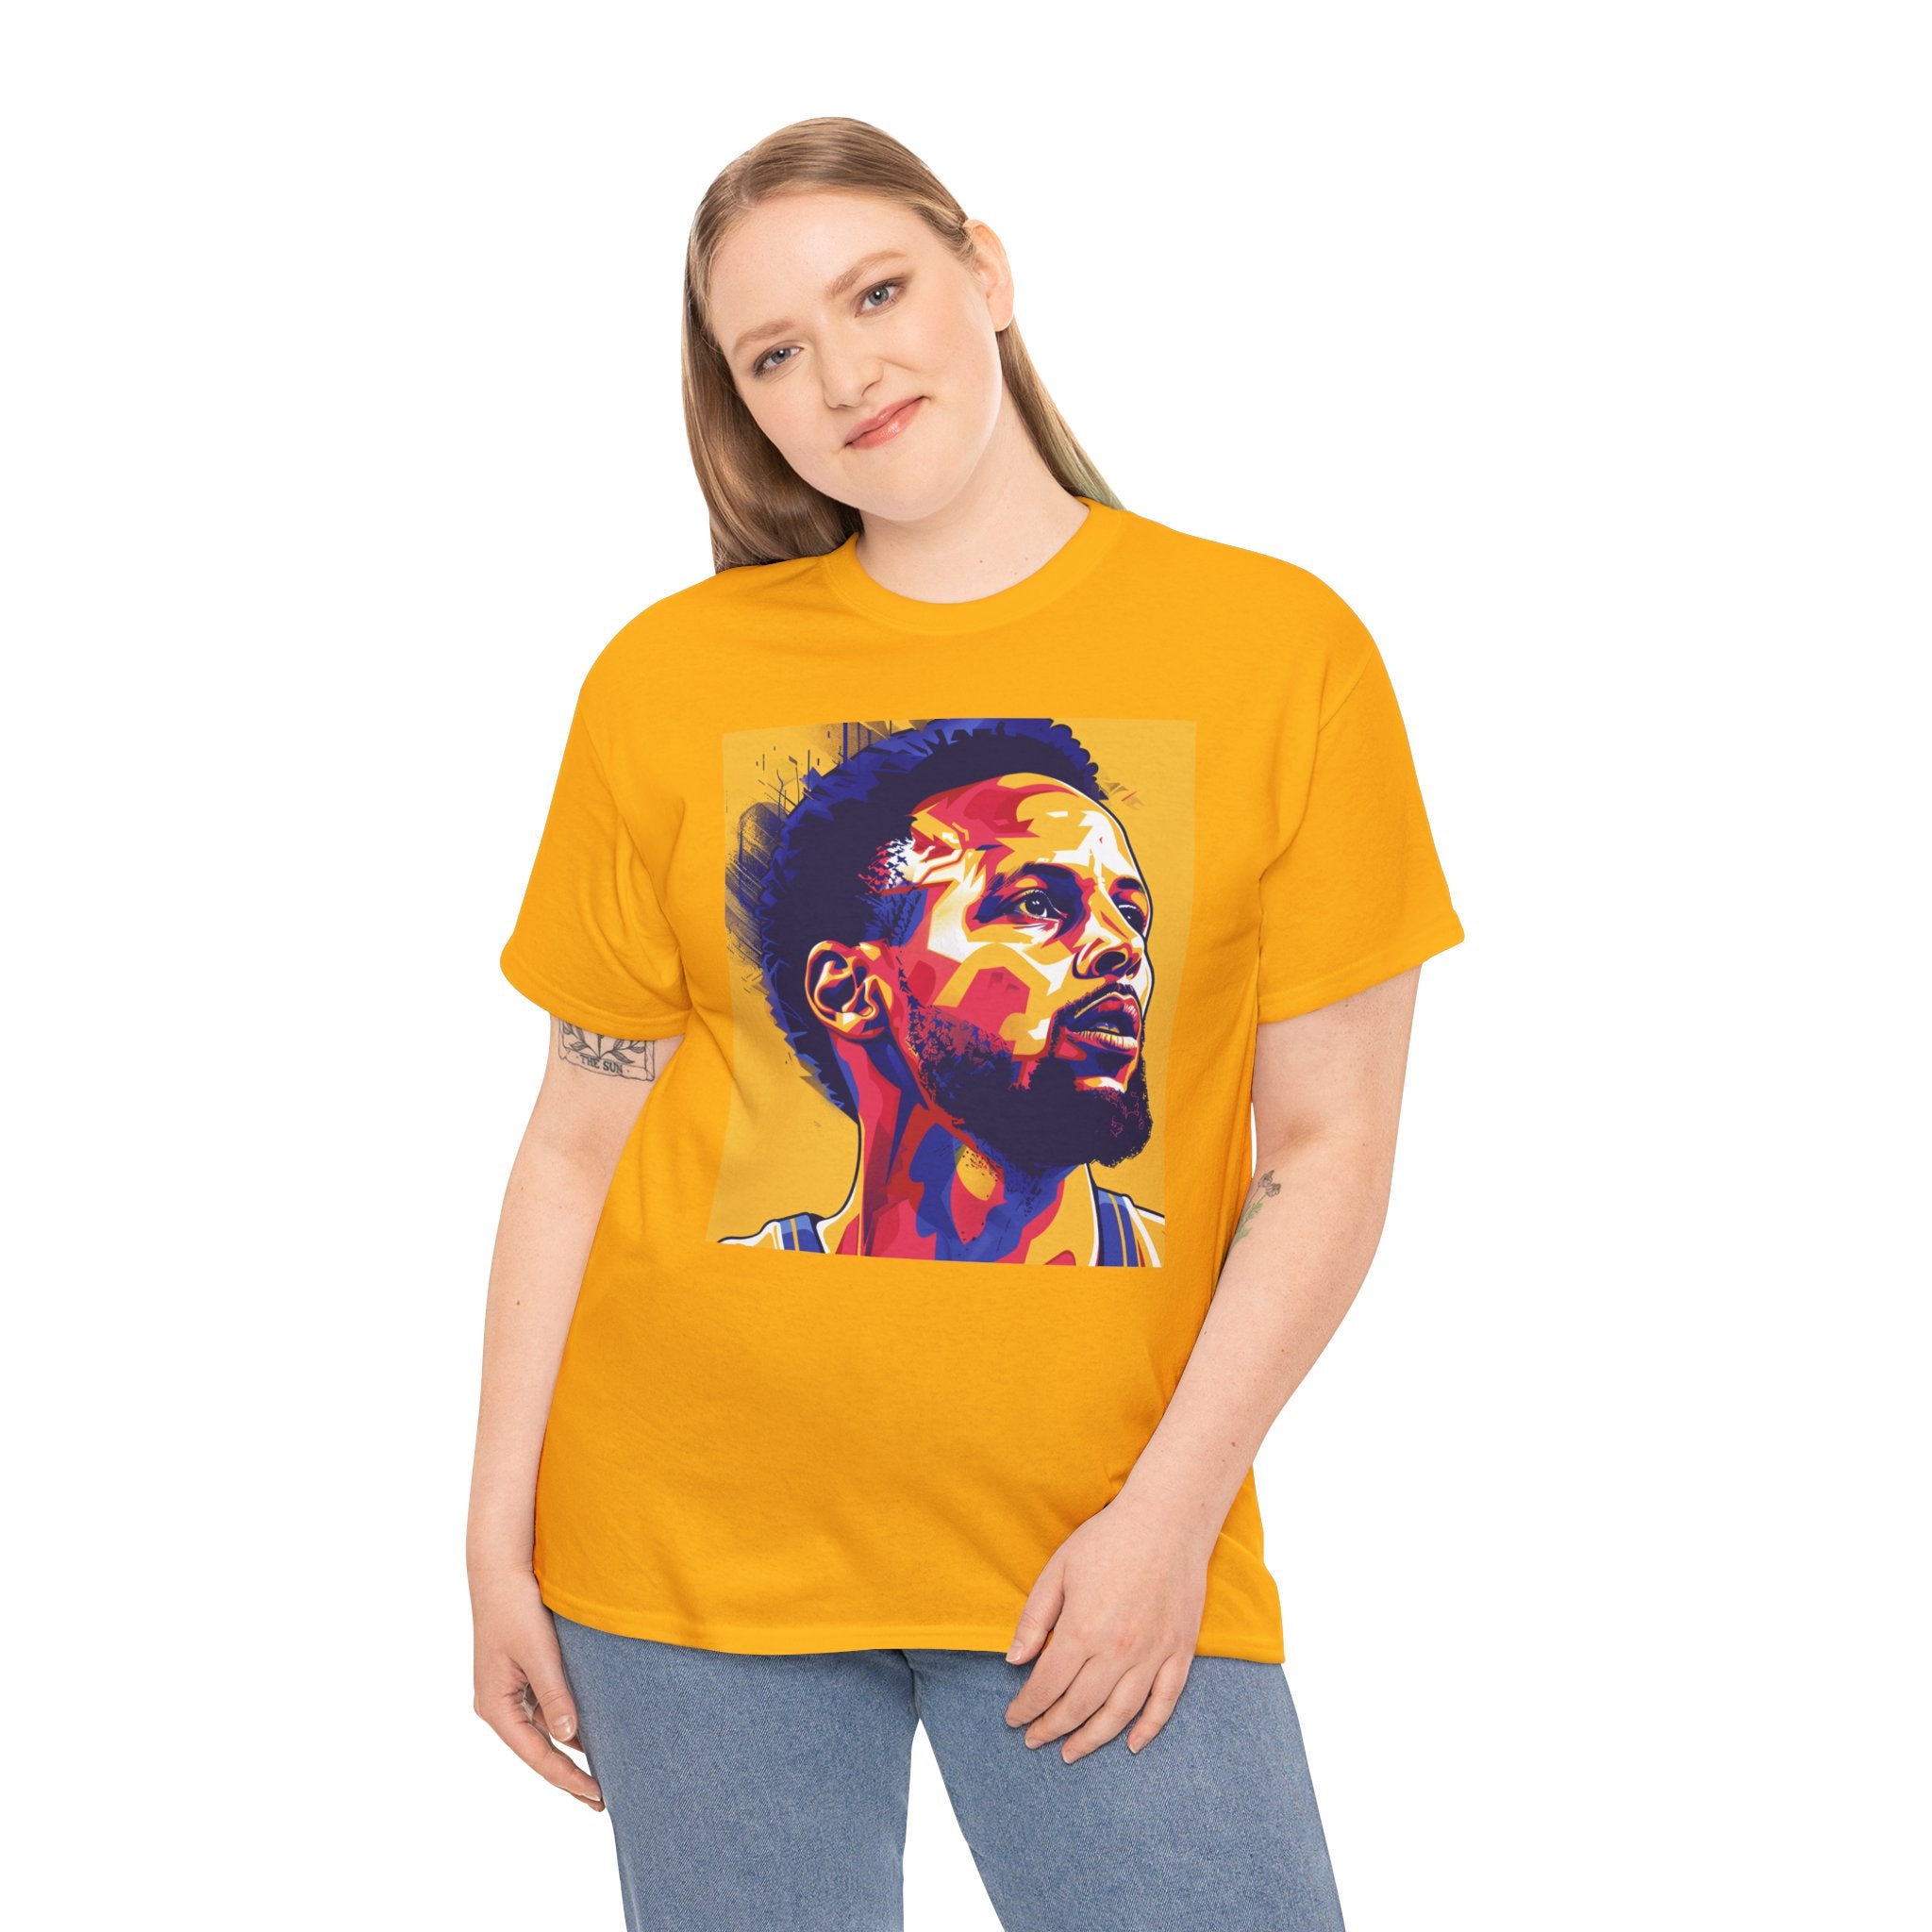 The image showcases a high-quality unisex heavy cotton tee in a classic cut, featuring vibrant graphics that pay homage to the legendary 3-point shooter, Steph. The design captures the excitement and precision of his game, making it an essential addition to any basketball fan's wardrobe